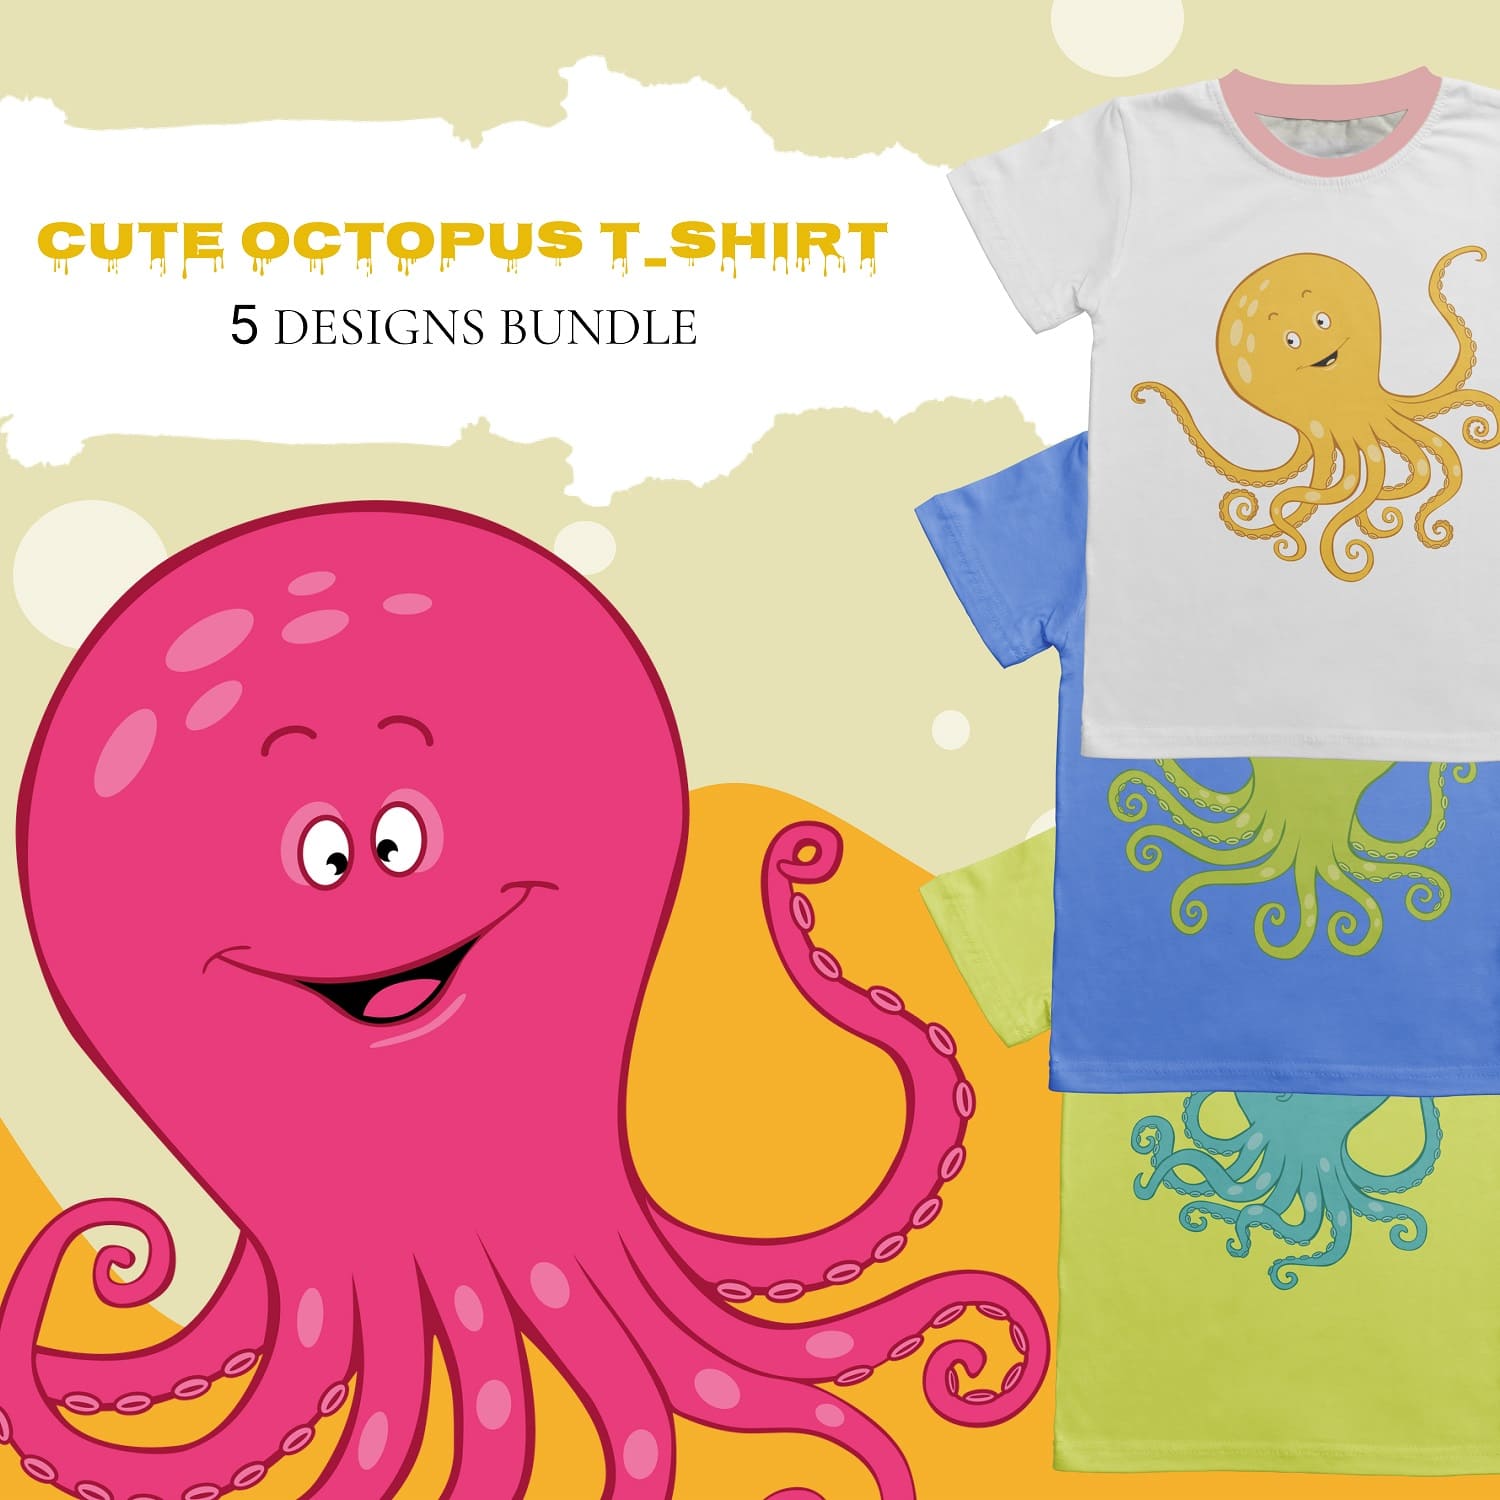 T-shirt design with cute octopus.